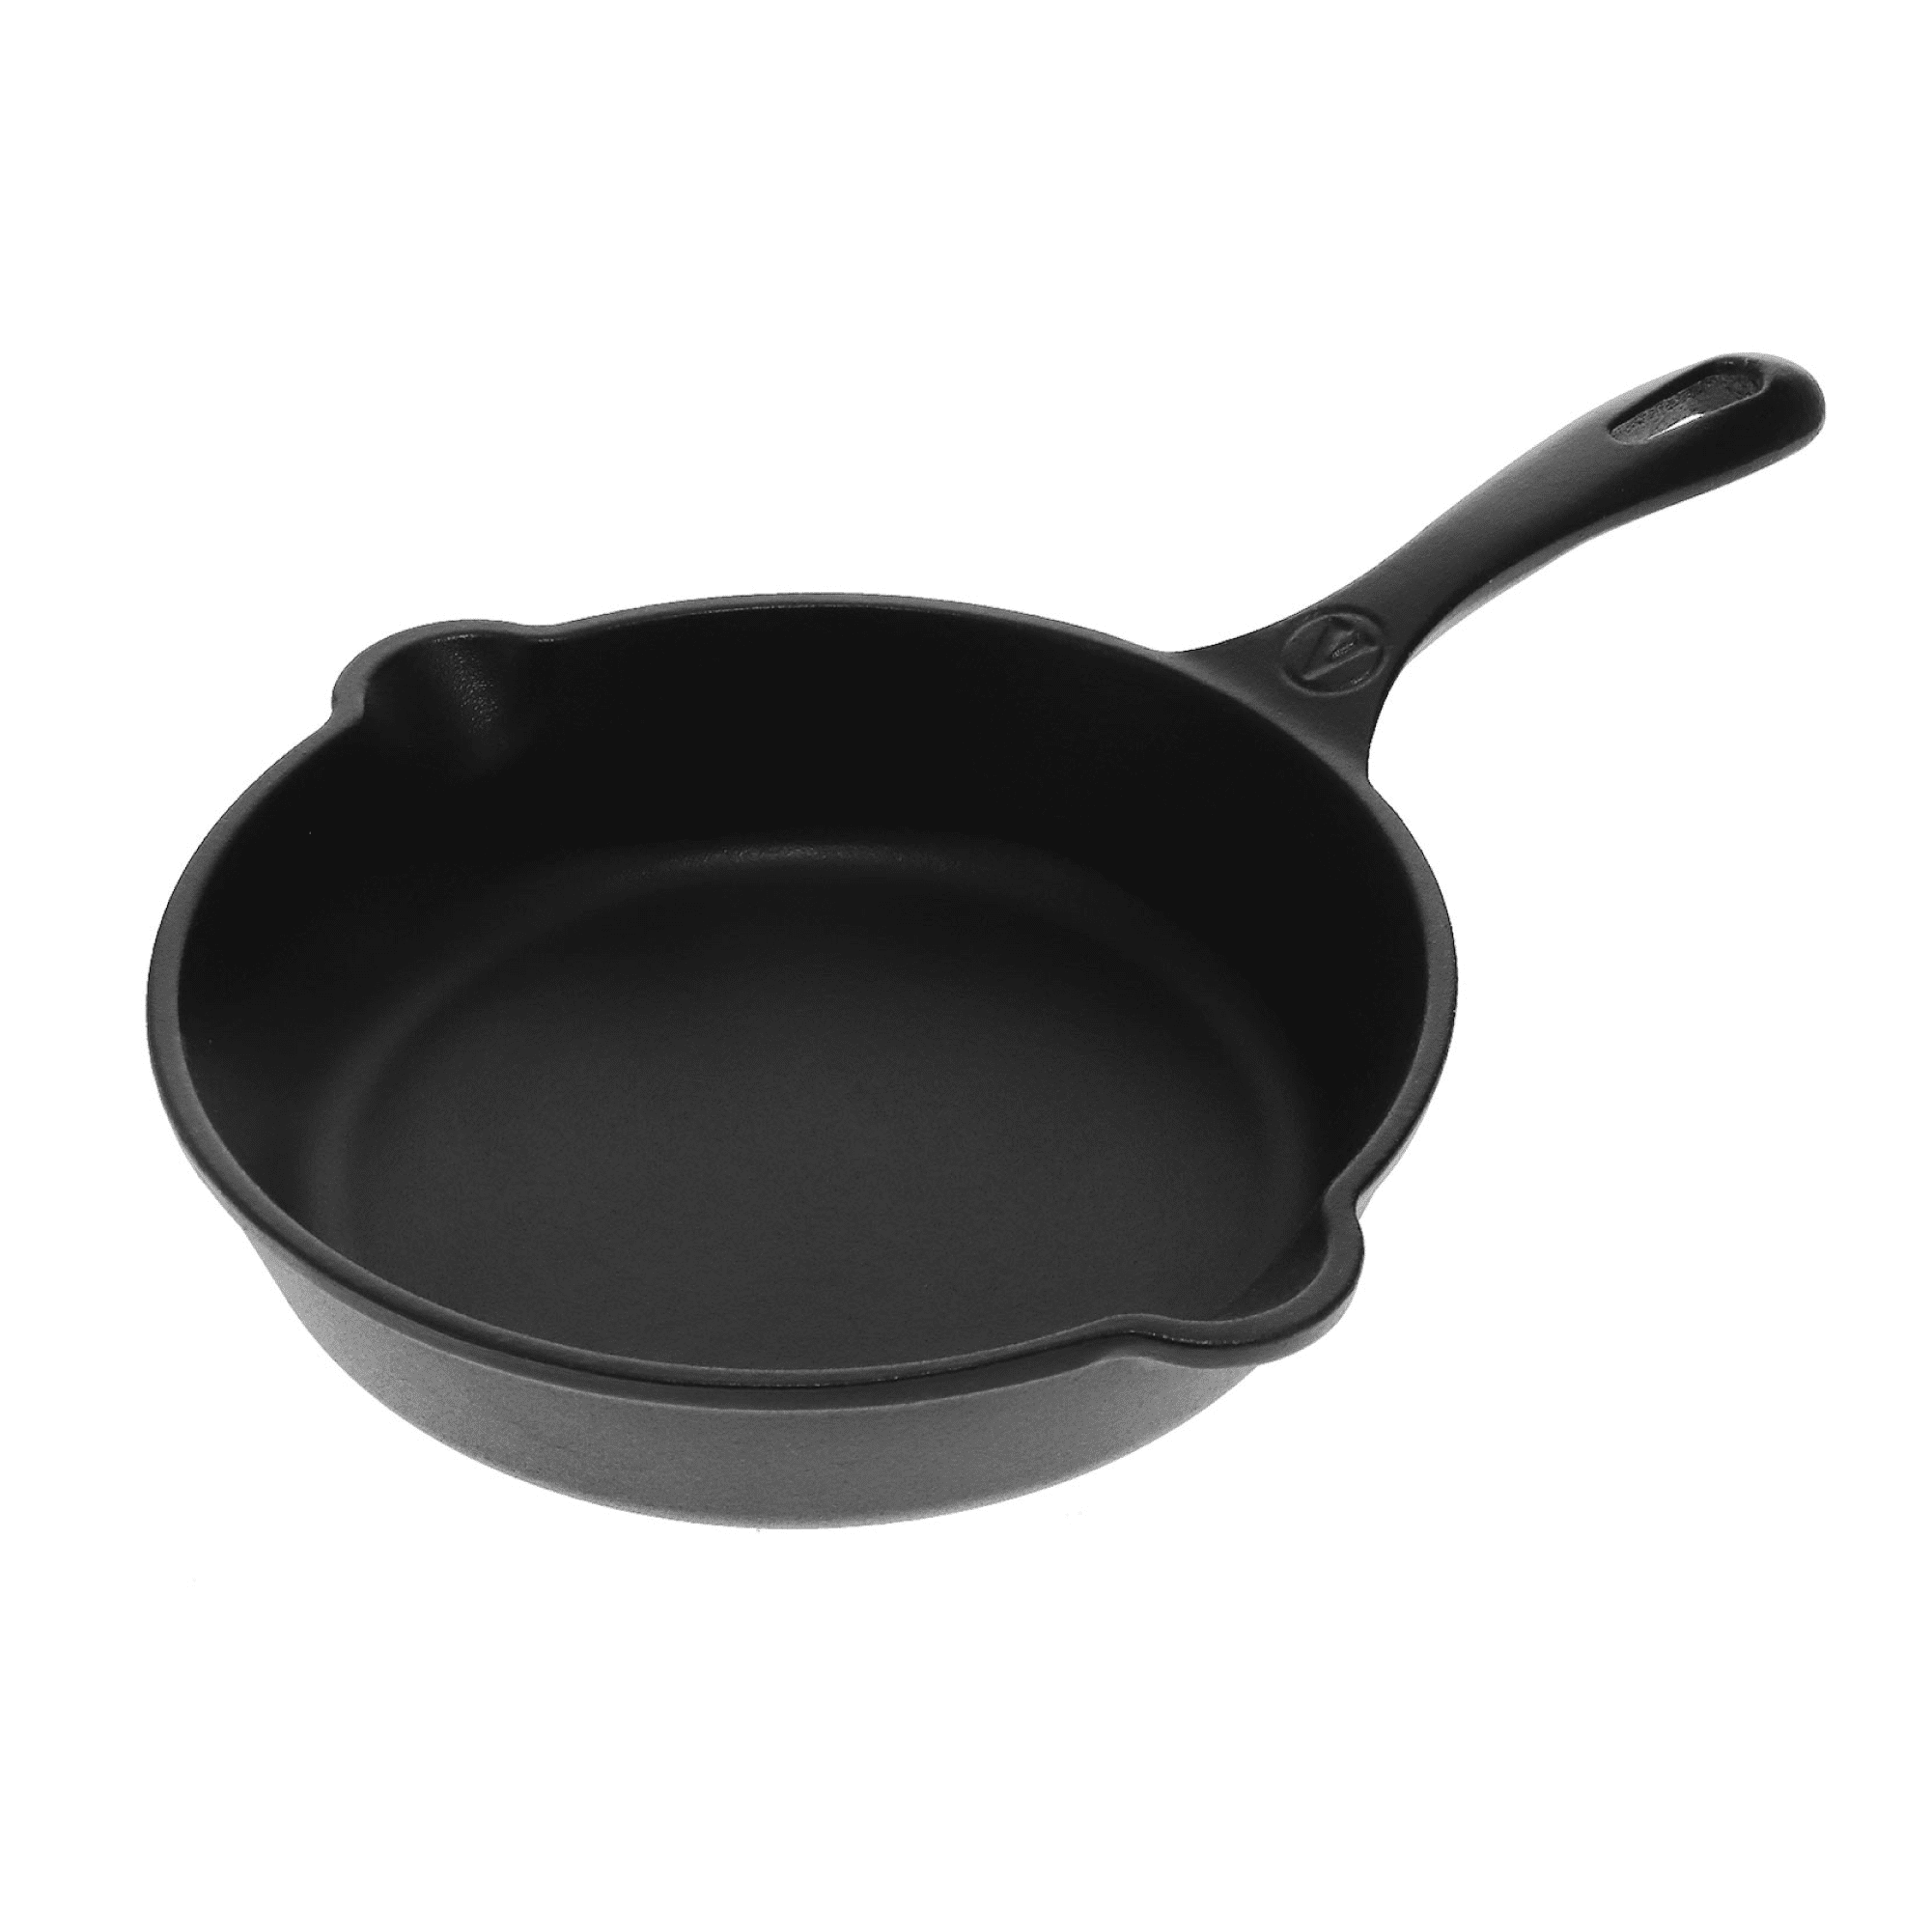  Victoria Cast-Iron Skillet, Pre-Seasoned Cast-Iron Frying Pan  with Long Handle, Made in Colombia, 12 Inch & Glass Lid for 12 Inch Cast  Iron Skillet, Frying Pan Lid with Stainless Steel Air